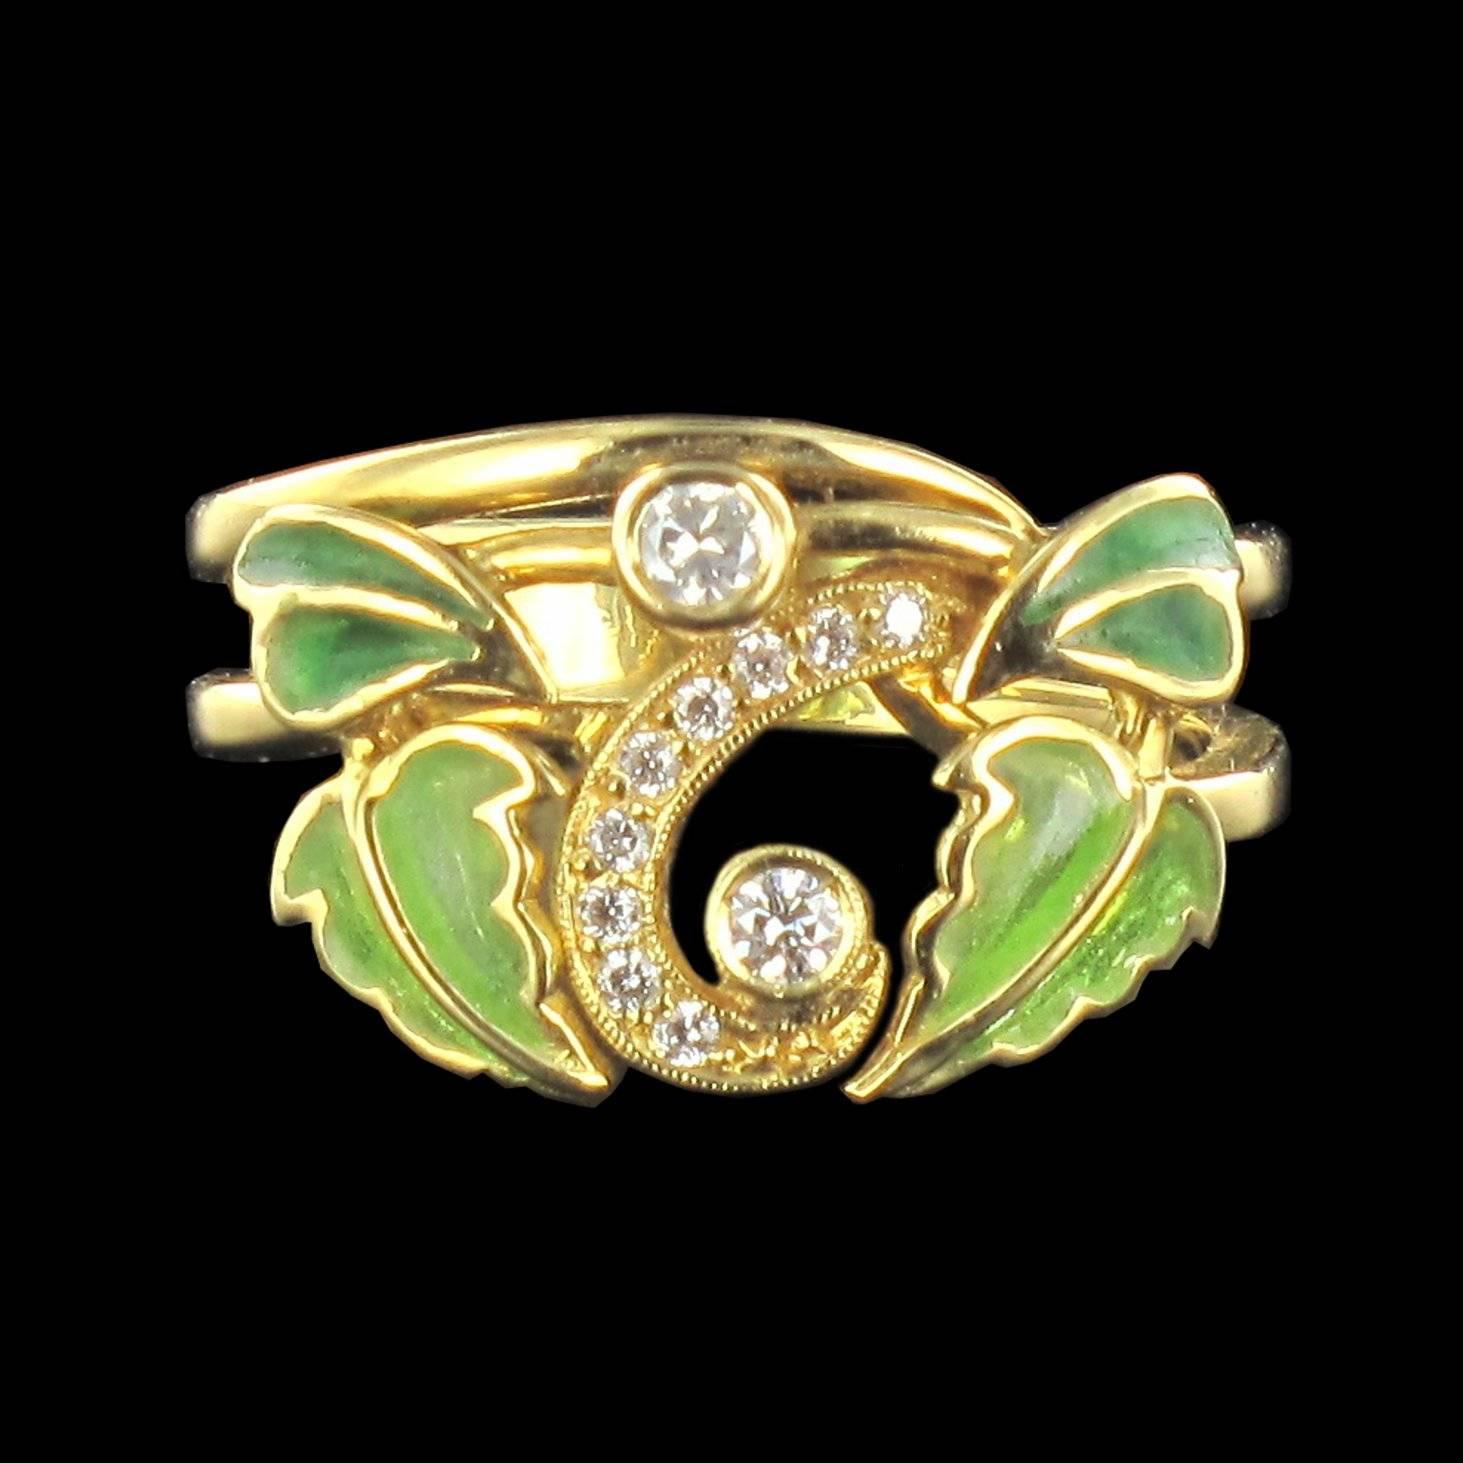 Ring in 18 carat yellow gold, eagle head hallmark. 

This ring is composed of 2 golden bands that are set at the front with 2 bezel set brilliant cut diamonds in an openwork bed set with 9 other smaller diamonds in a curl. On each side are